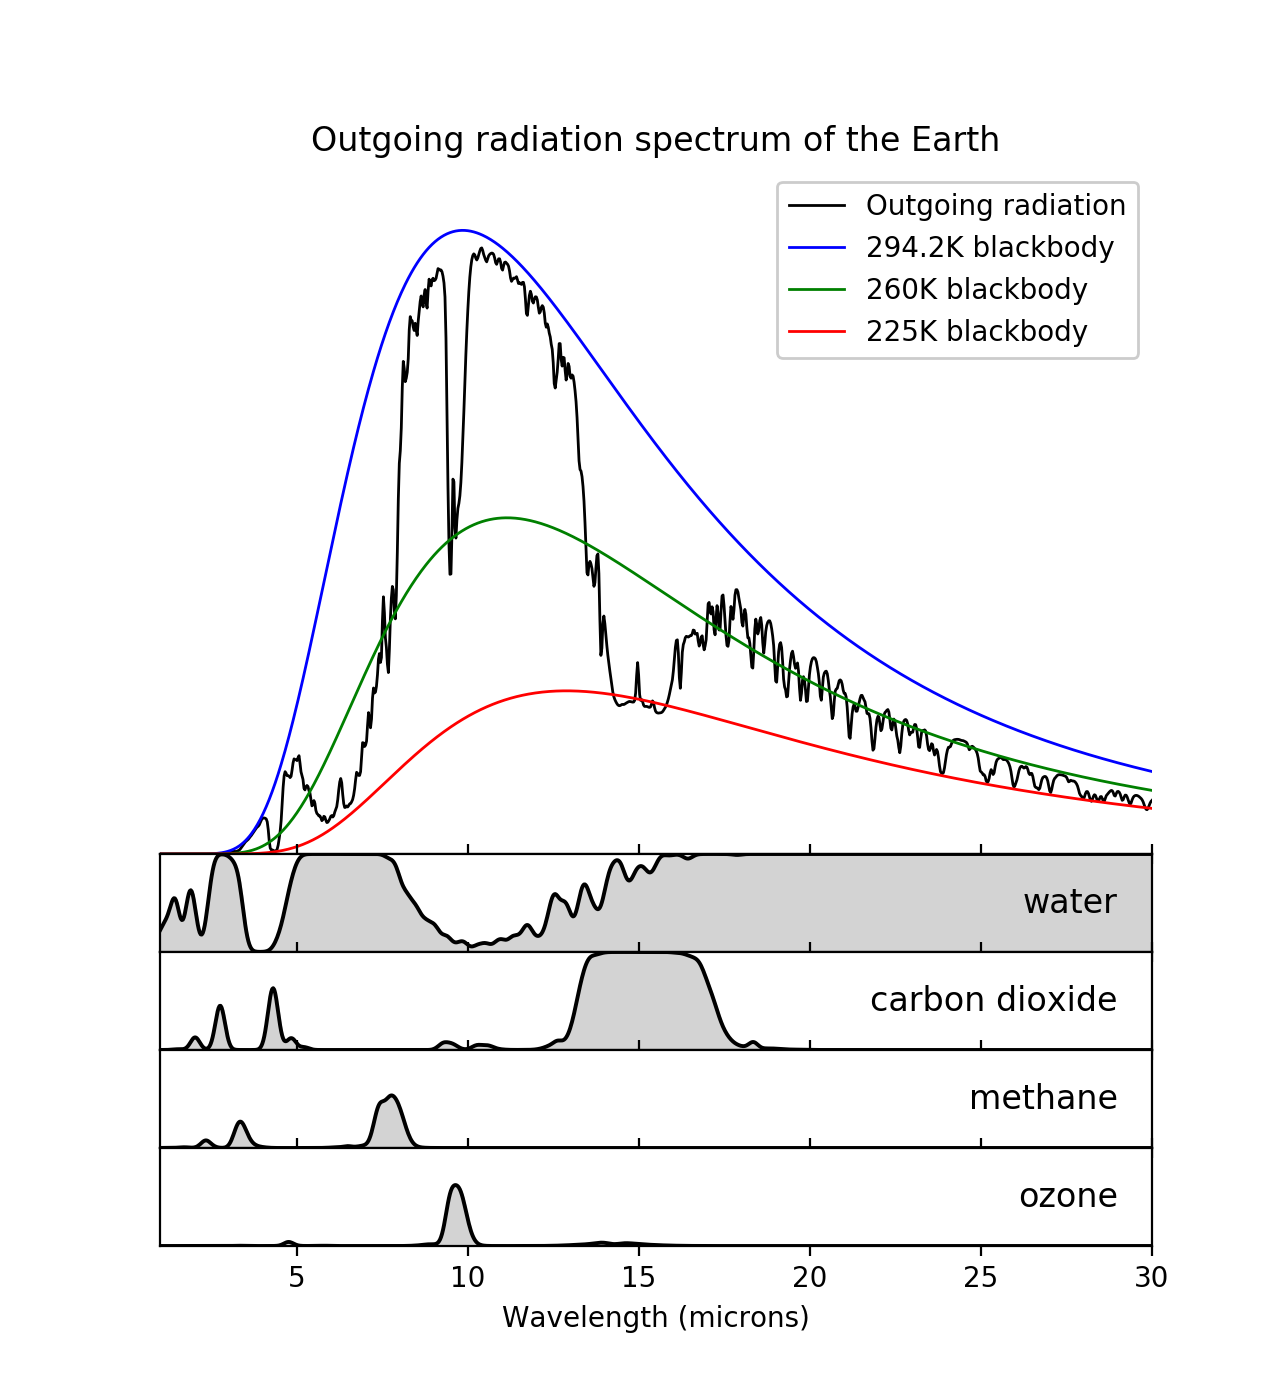 The spectrum of infrared emissions leaving the top of the atmosphere. The spectrum is compared to emissions of ideal blackbodies at temperatures of 294.2K, 260K, and 225K, which allows one to estimate the temperature of the layers of the atmosphere most responsible for emissions at a particular wavelength. The 294.2K blackbody emission spectrum was shown in the right half of the last figure of part 2, where it was described as a simplified representation of Earth’s emission spectrum. The attenuation due to four greenhouse gases is shown below the spectrum; this was also shown in the previous figure.